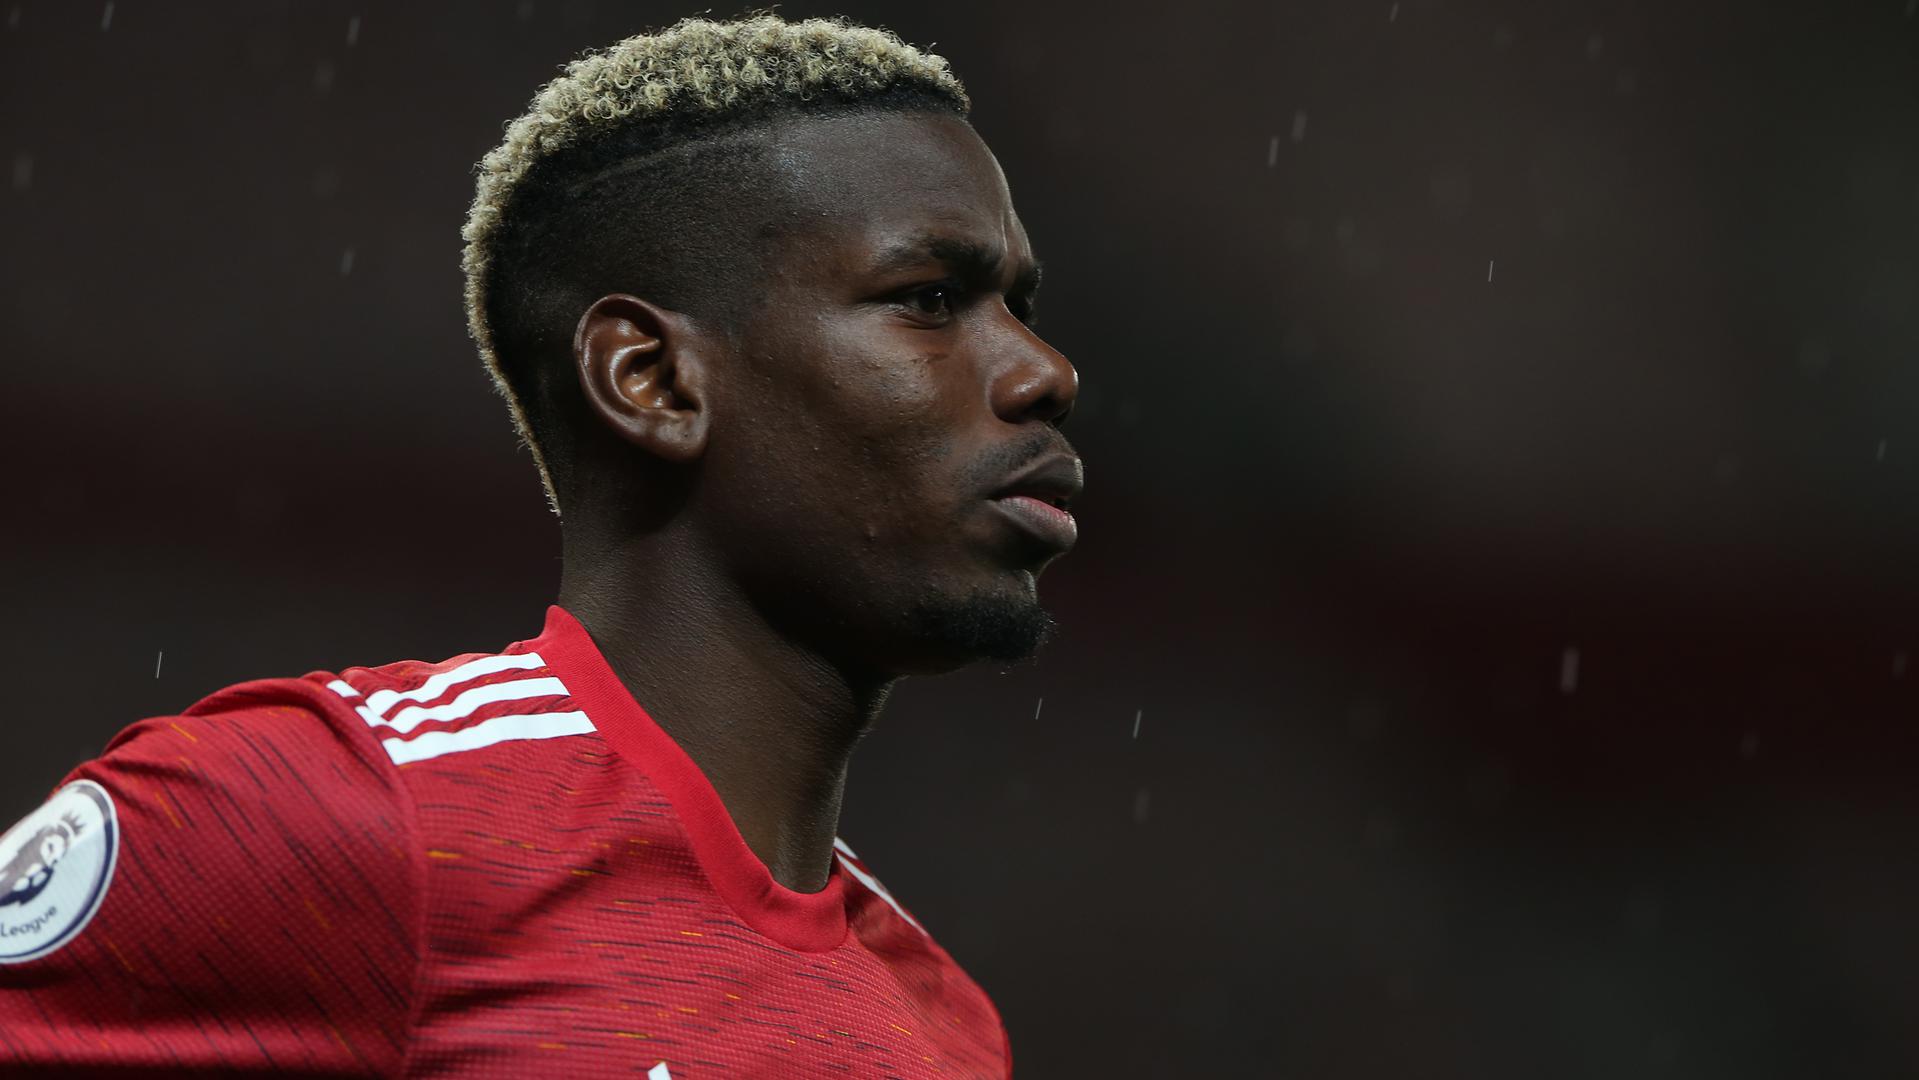 Juventus are reportedly going back in for Manchester Uniteds Paul Pogba